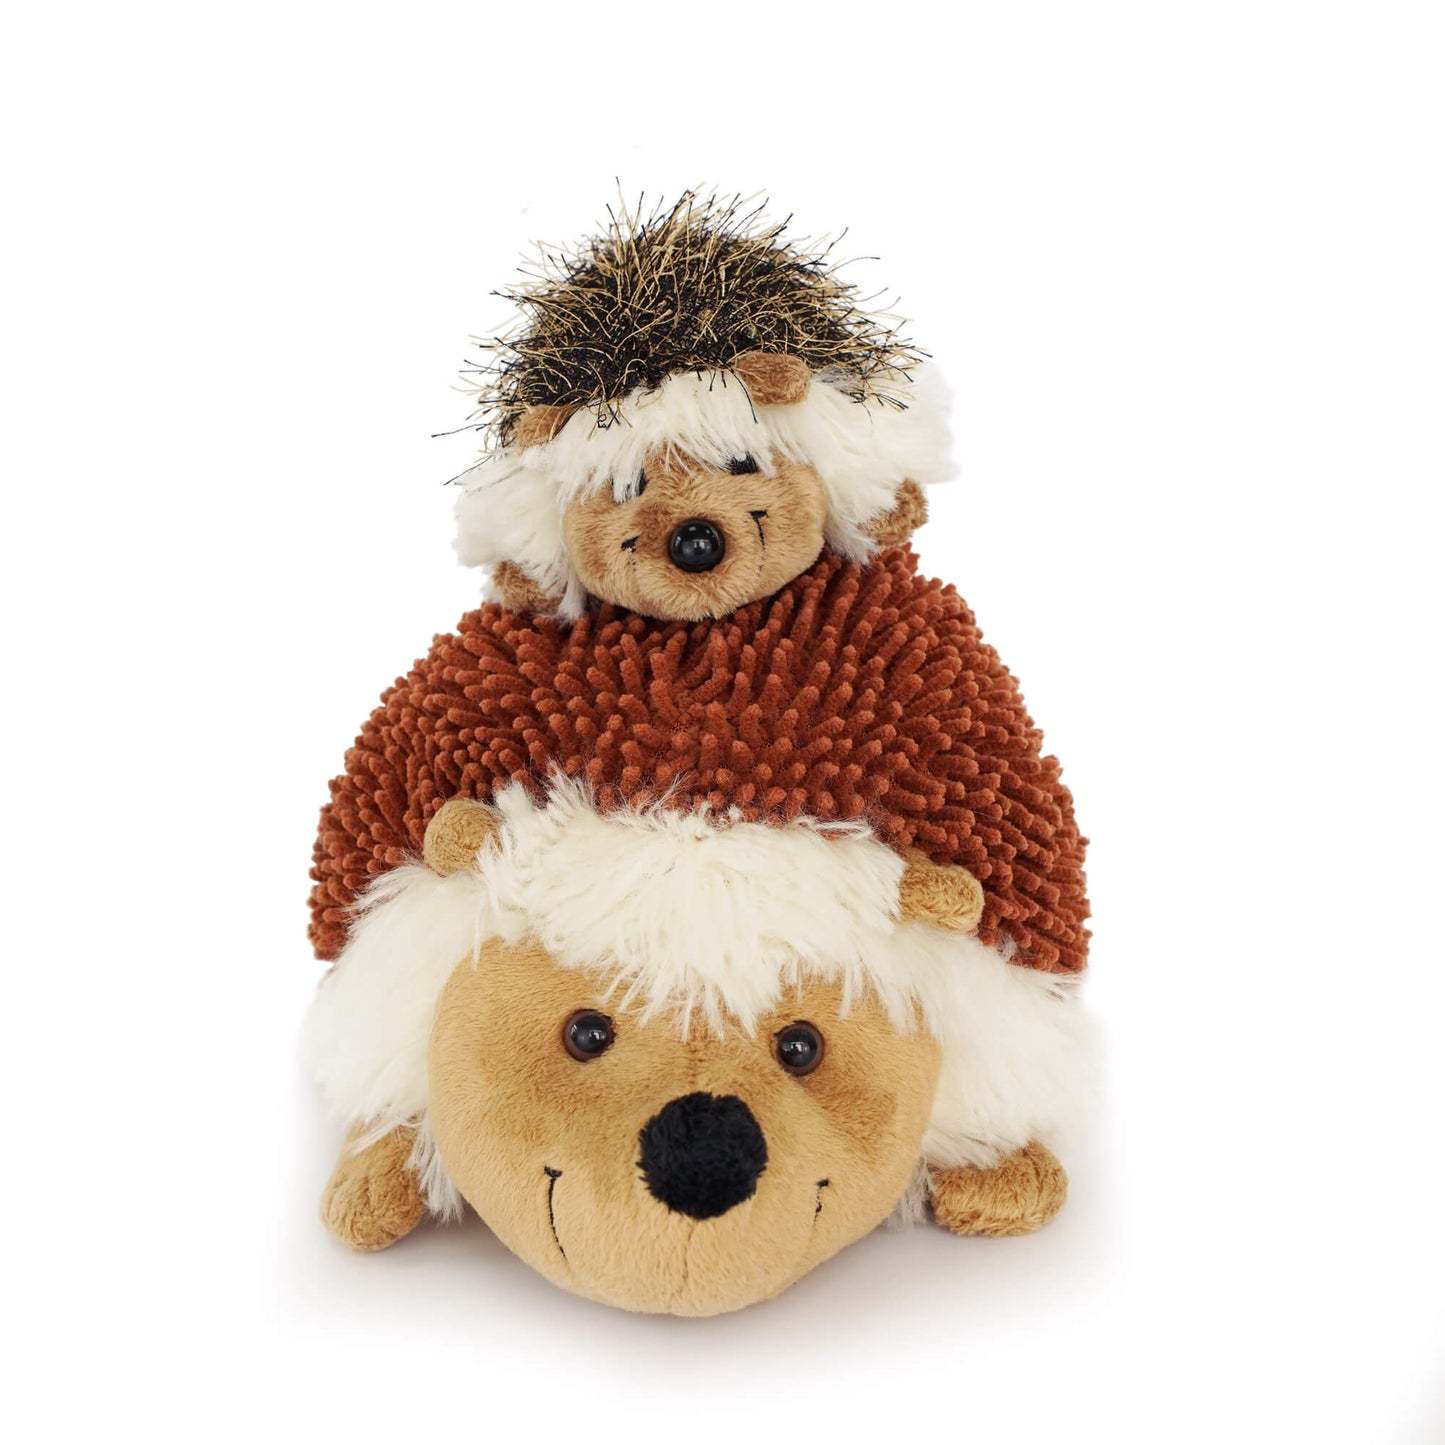 Adorable hedgehog stuffed animal gifts for kids PlushThis